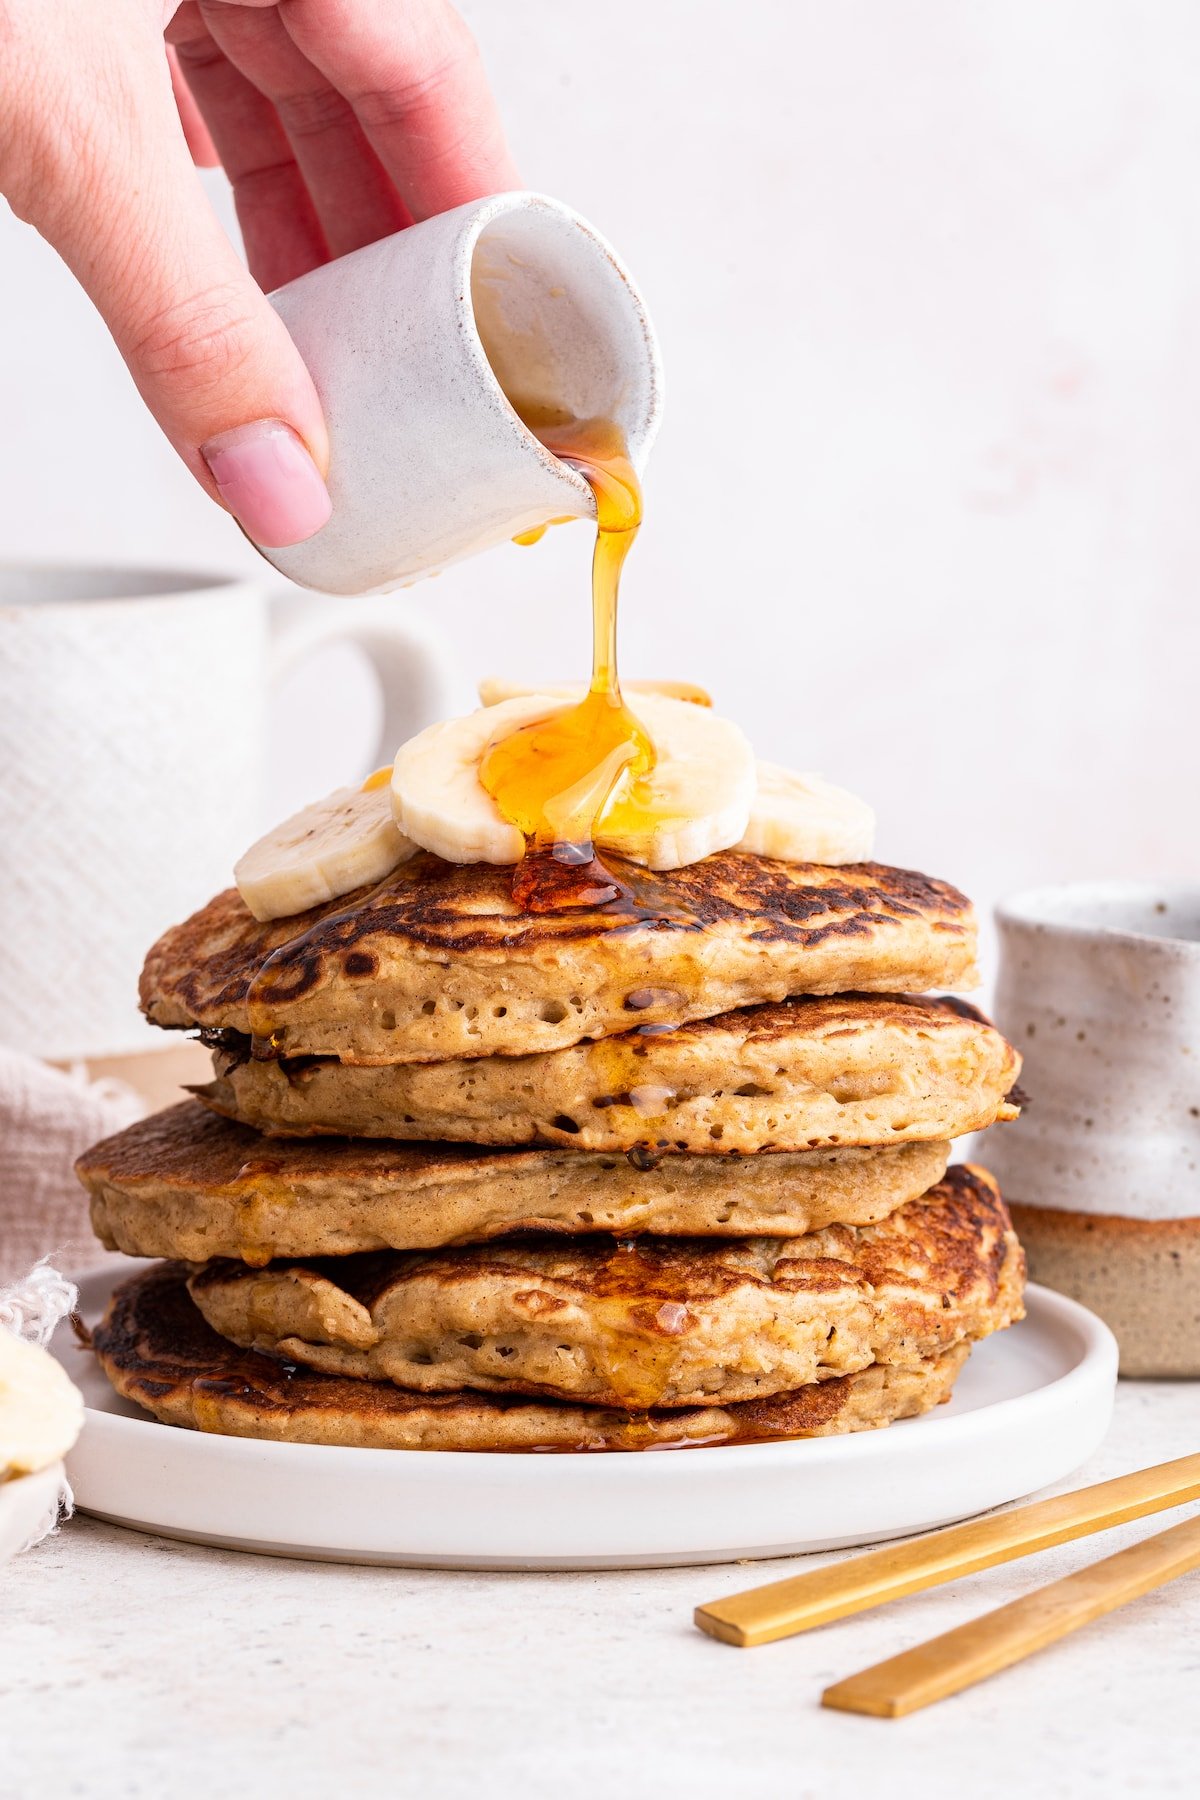 Maple syrup being poured over a stack of multiple overnight oatmeal pancakes that are topped with banana slices.